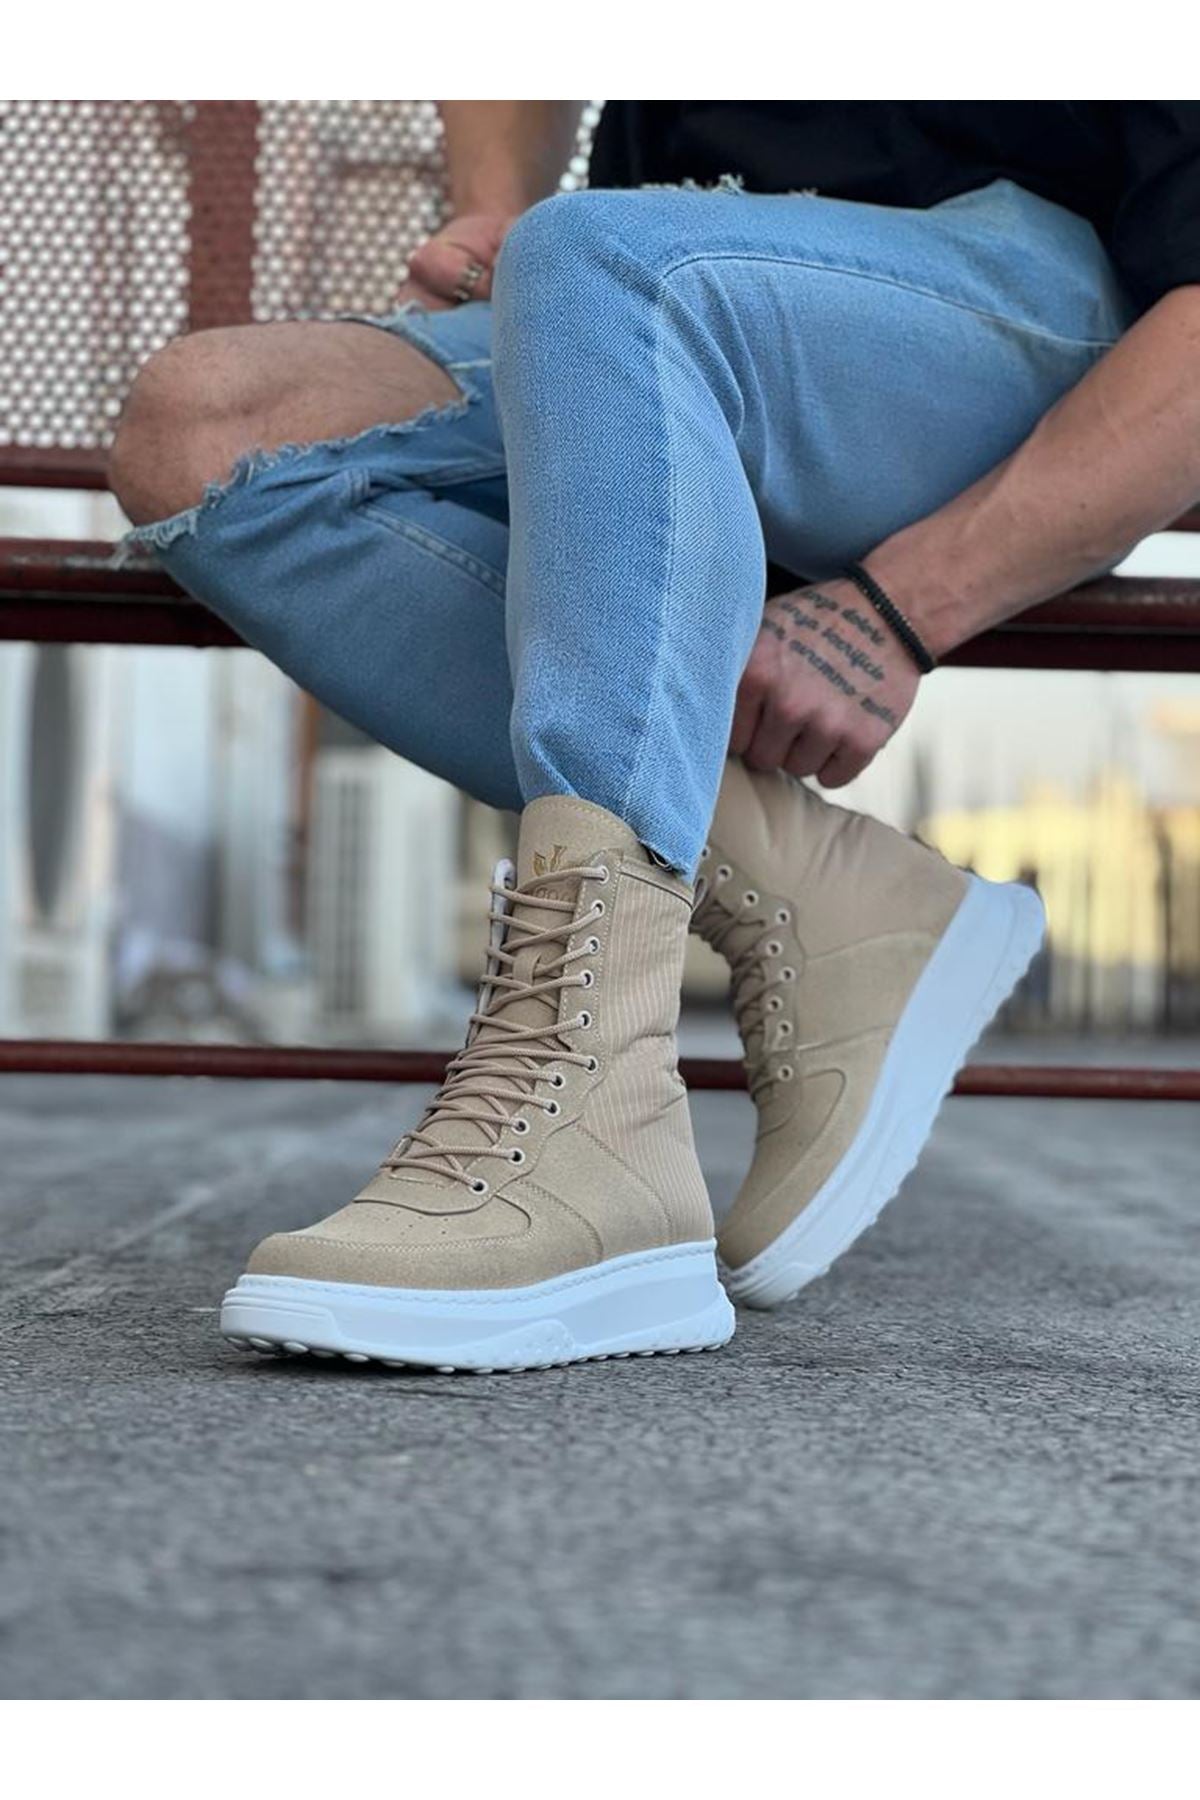 WG012 Men's Beige Suede Leather Long Lace-Up Boots - STREETMODE™